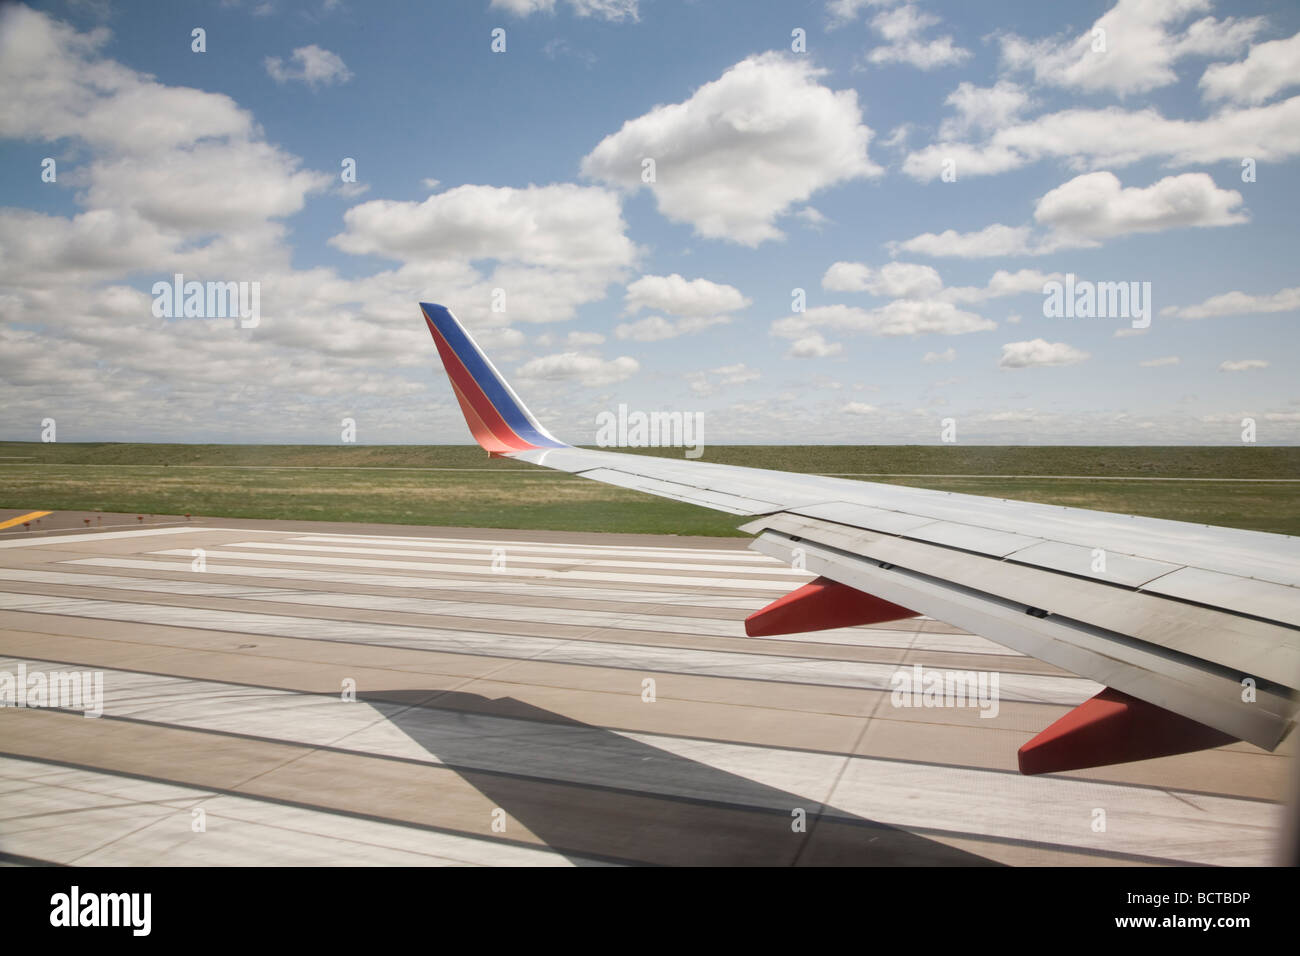 Aerial View from a Southwest Airlines Airlpane Taking Off from Denver International Airport Overlooking Runway Stock Photo